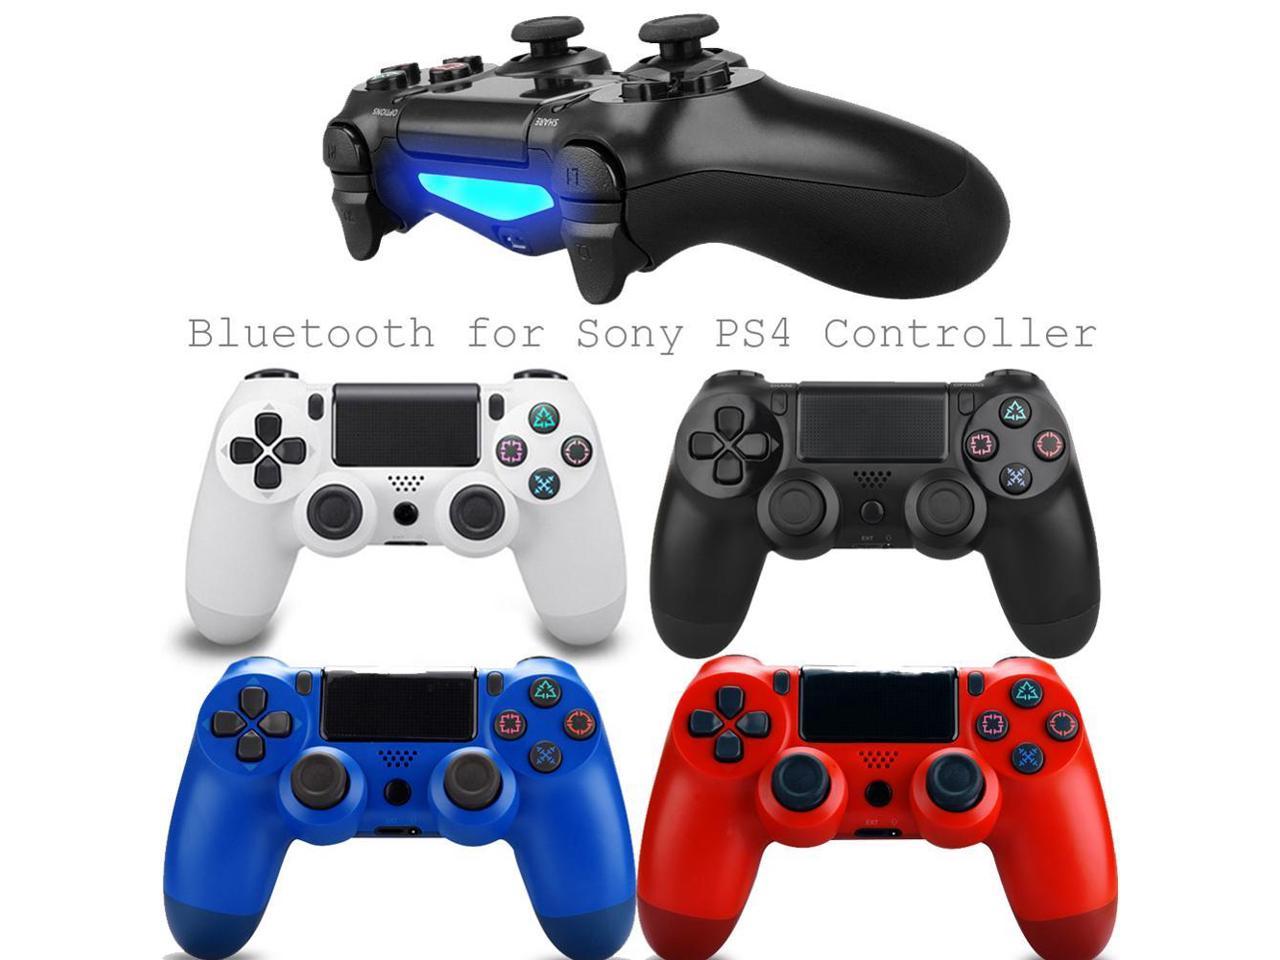 Bluetooth Wireless Gamepad for Sony Playstation 4 Joystick Gamepad for Sony PS4 Remote Controller For Dualshock4 PS4 Controller